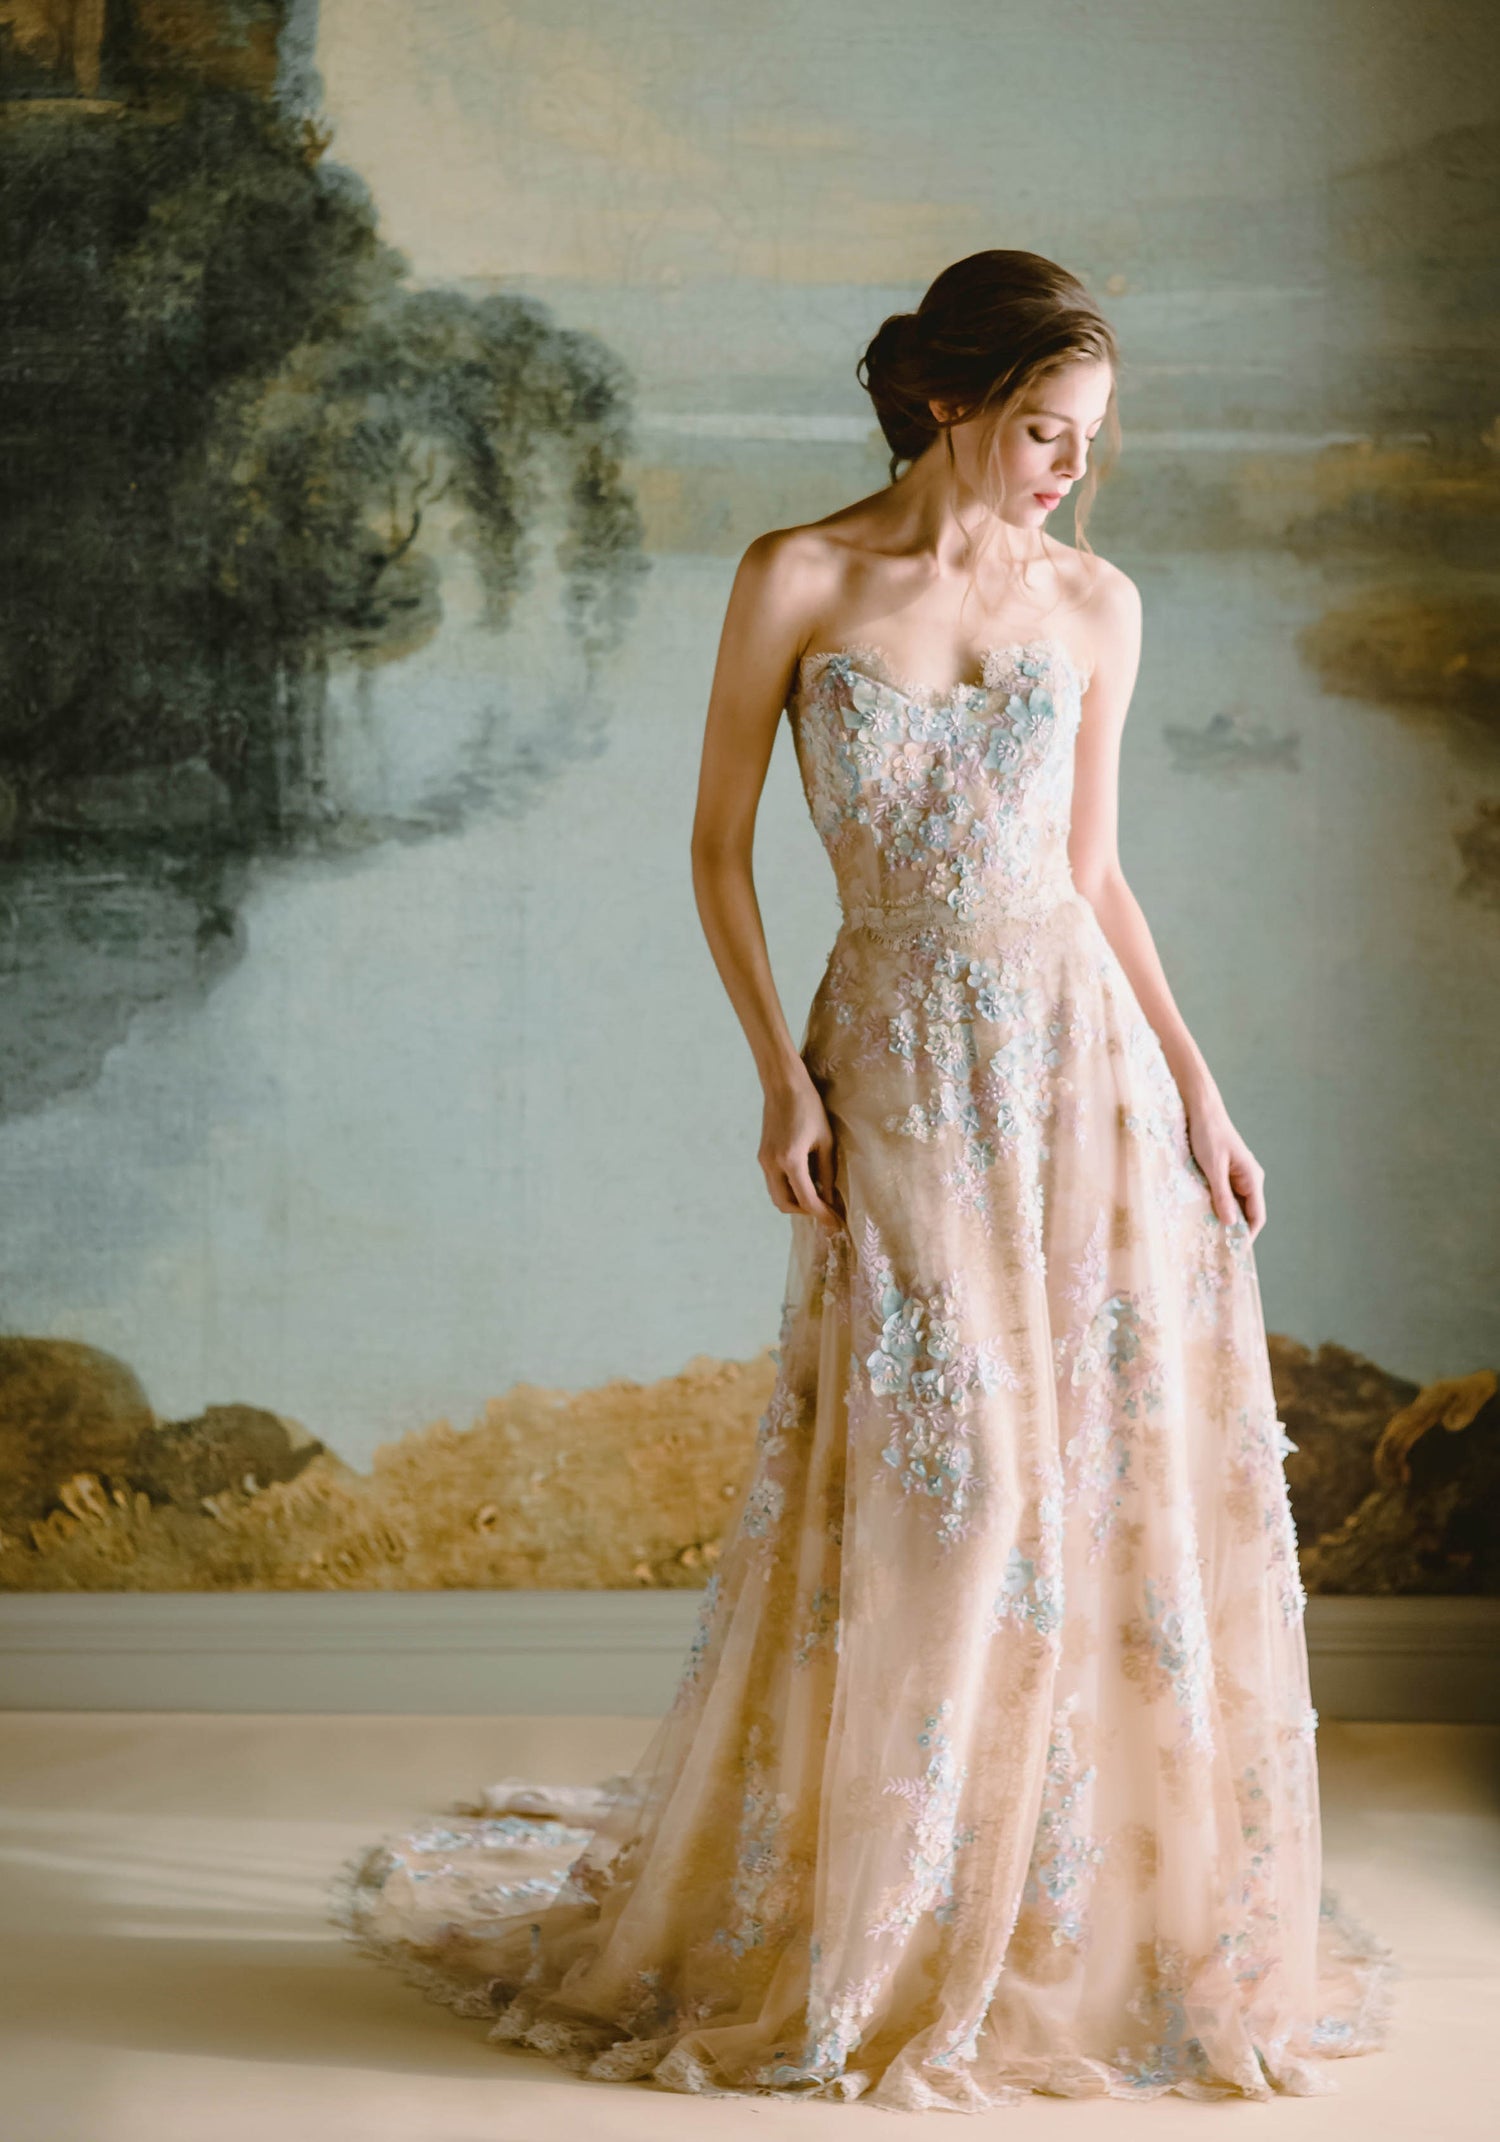 Ophelia Colored Bridal Gown | Champagne Colored Wedding Gown